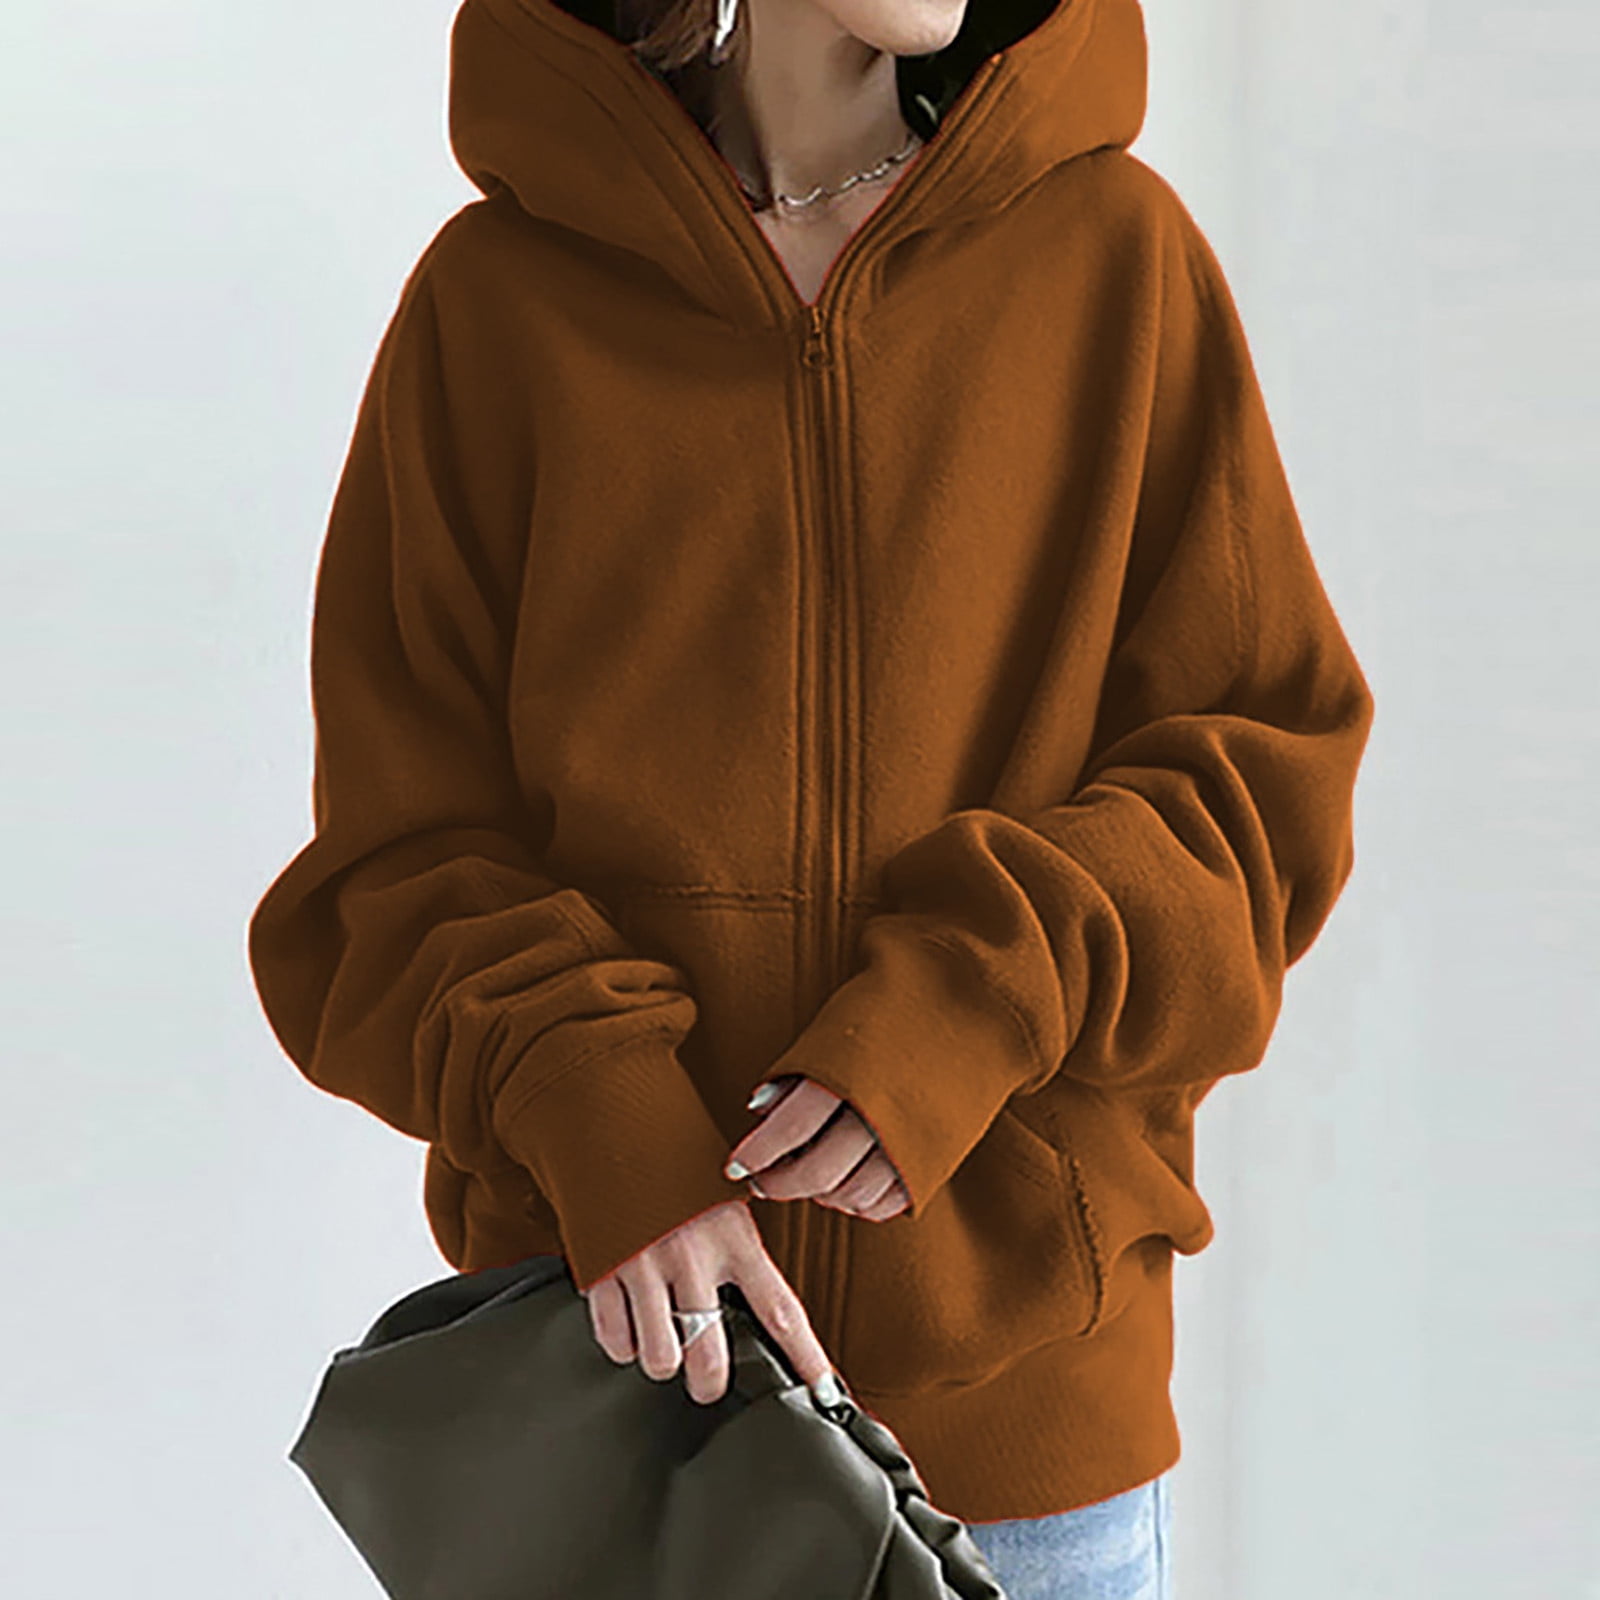 Womens Oversized Hoodies Sweatshirts,Women's Solid Color Hoodie Zipper Long  Sleeve Sweatshirts Long Coat Tops With,Casual Comfy Fall Fashion Outfits